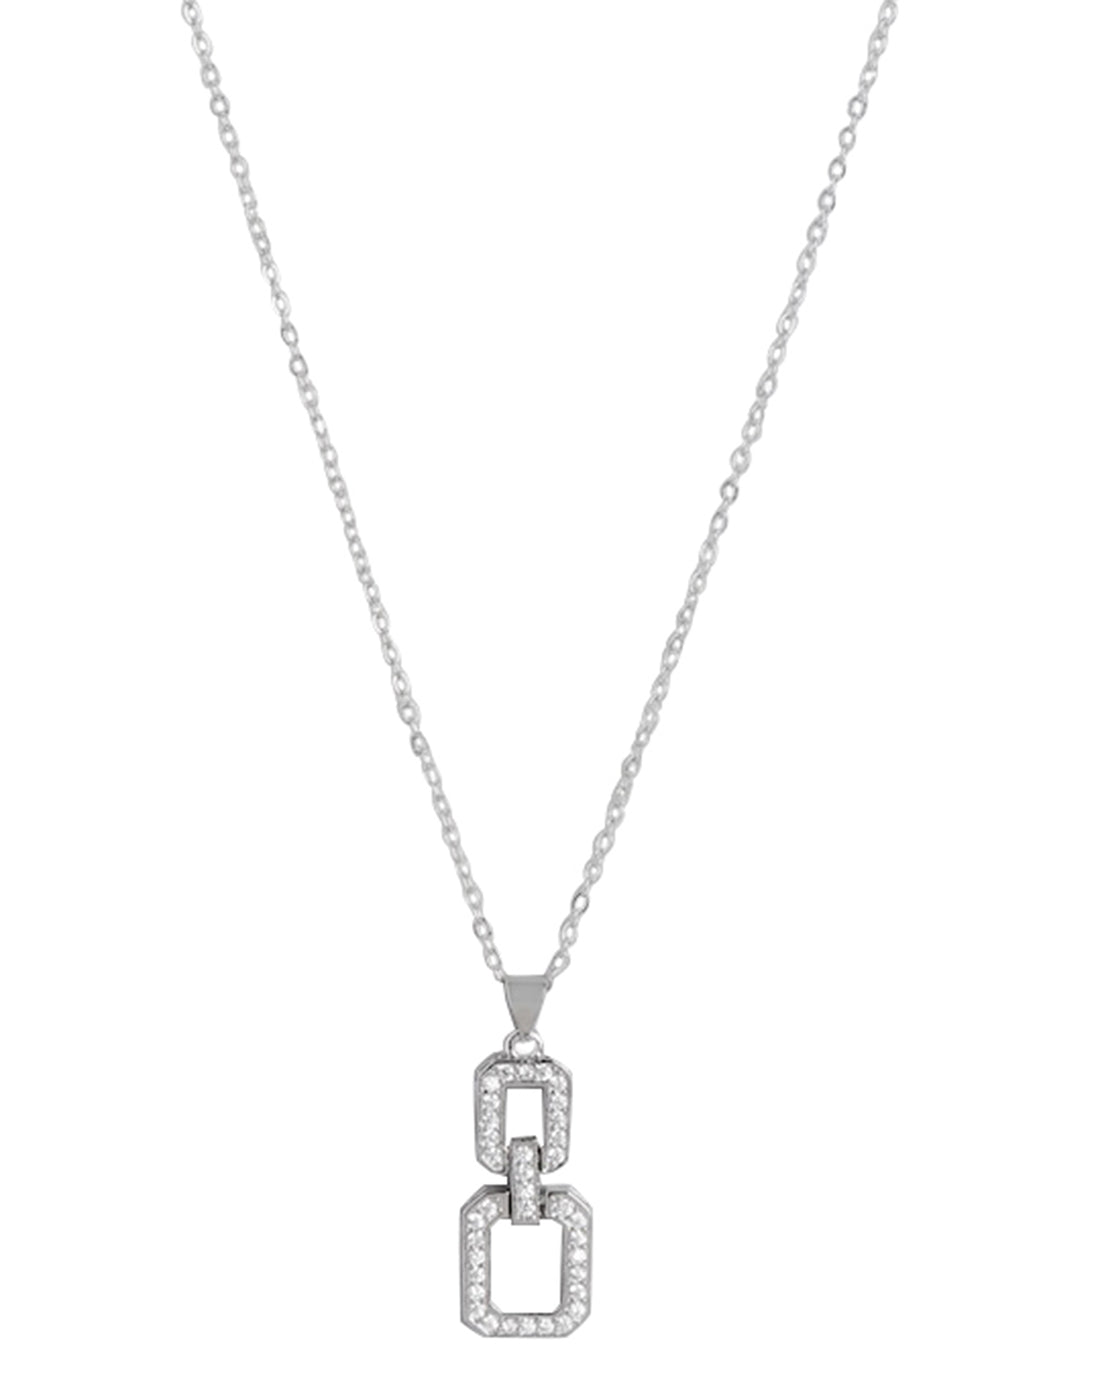 Cz With Rhodium Plated Pendant With Chain For Women